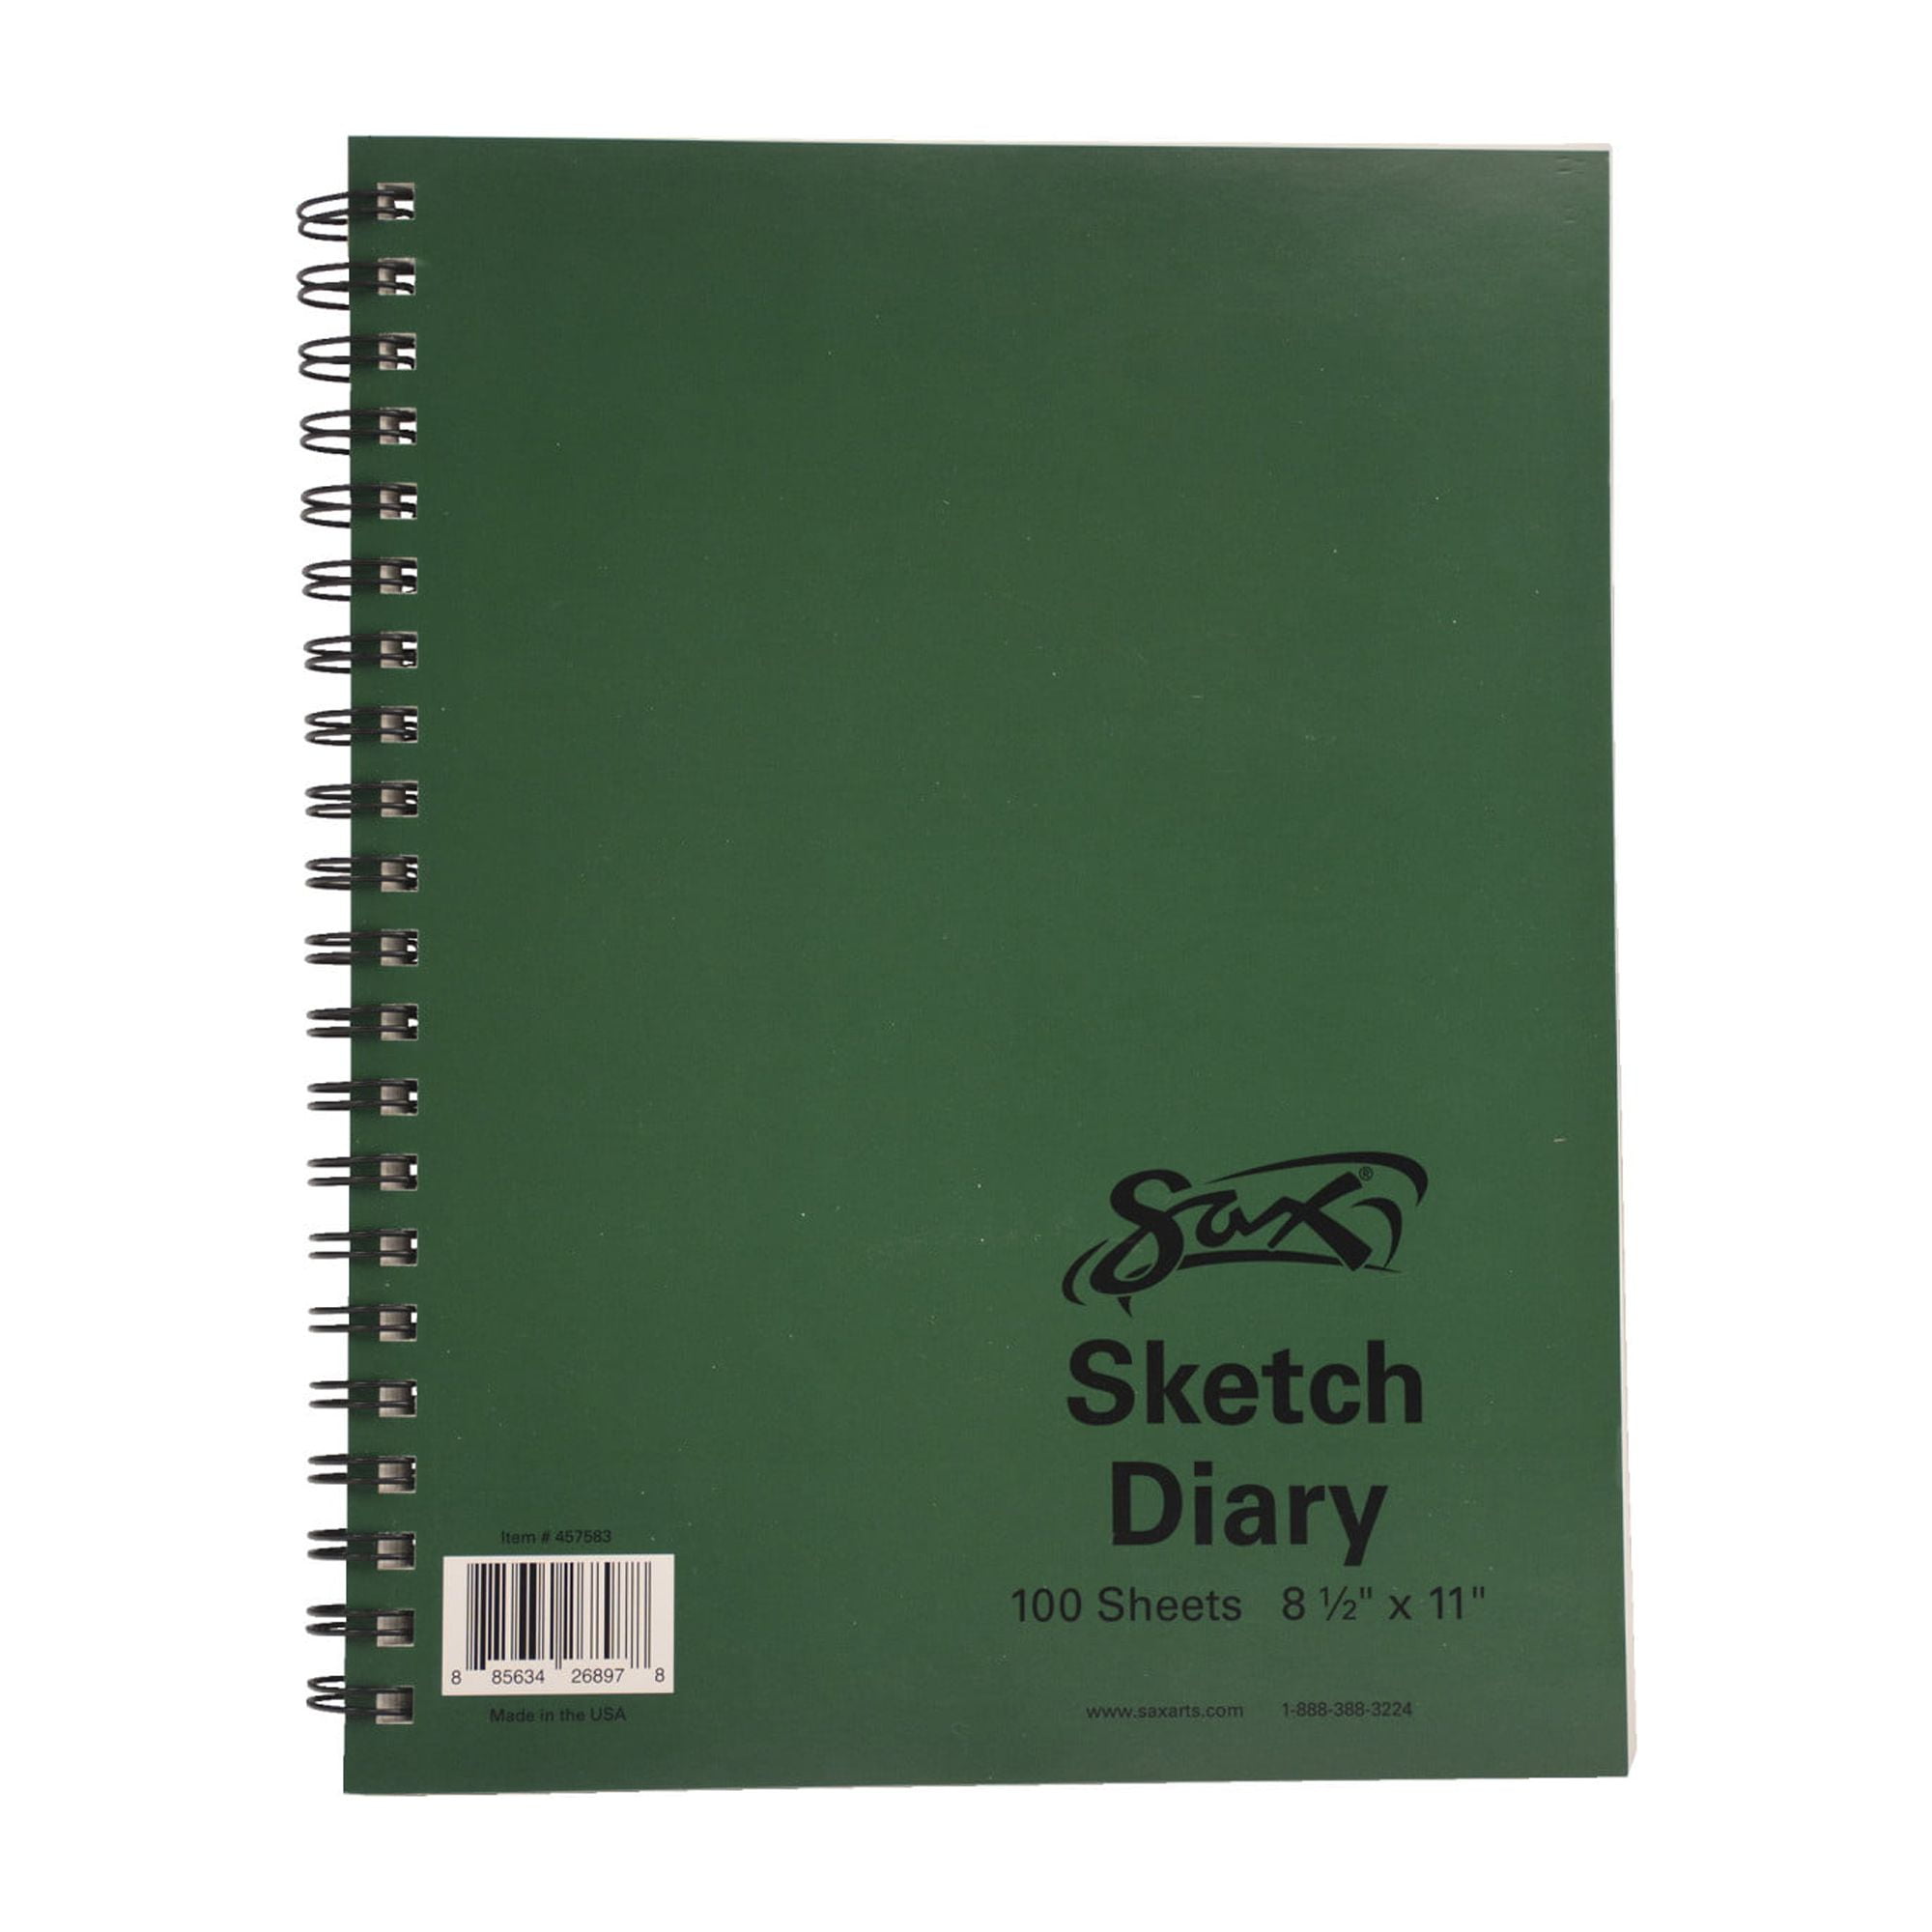 Create Your Own Cover Sketch Diary  Pacon Creative Products